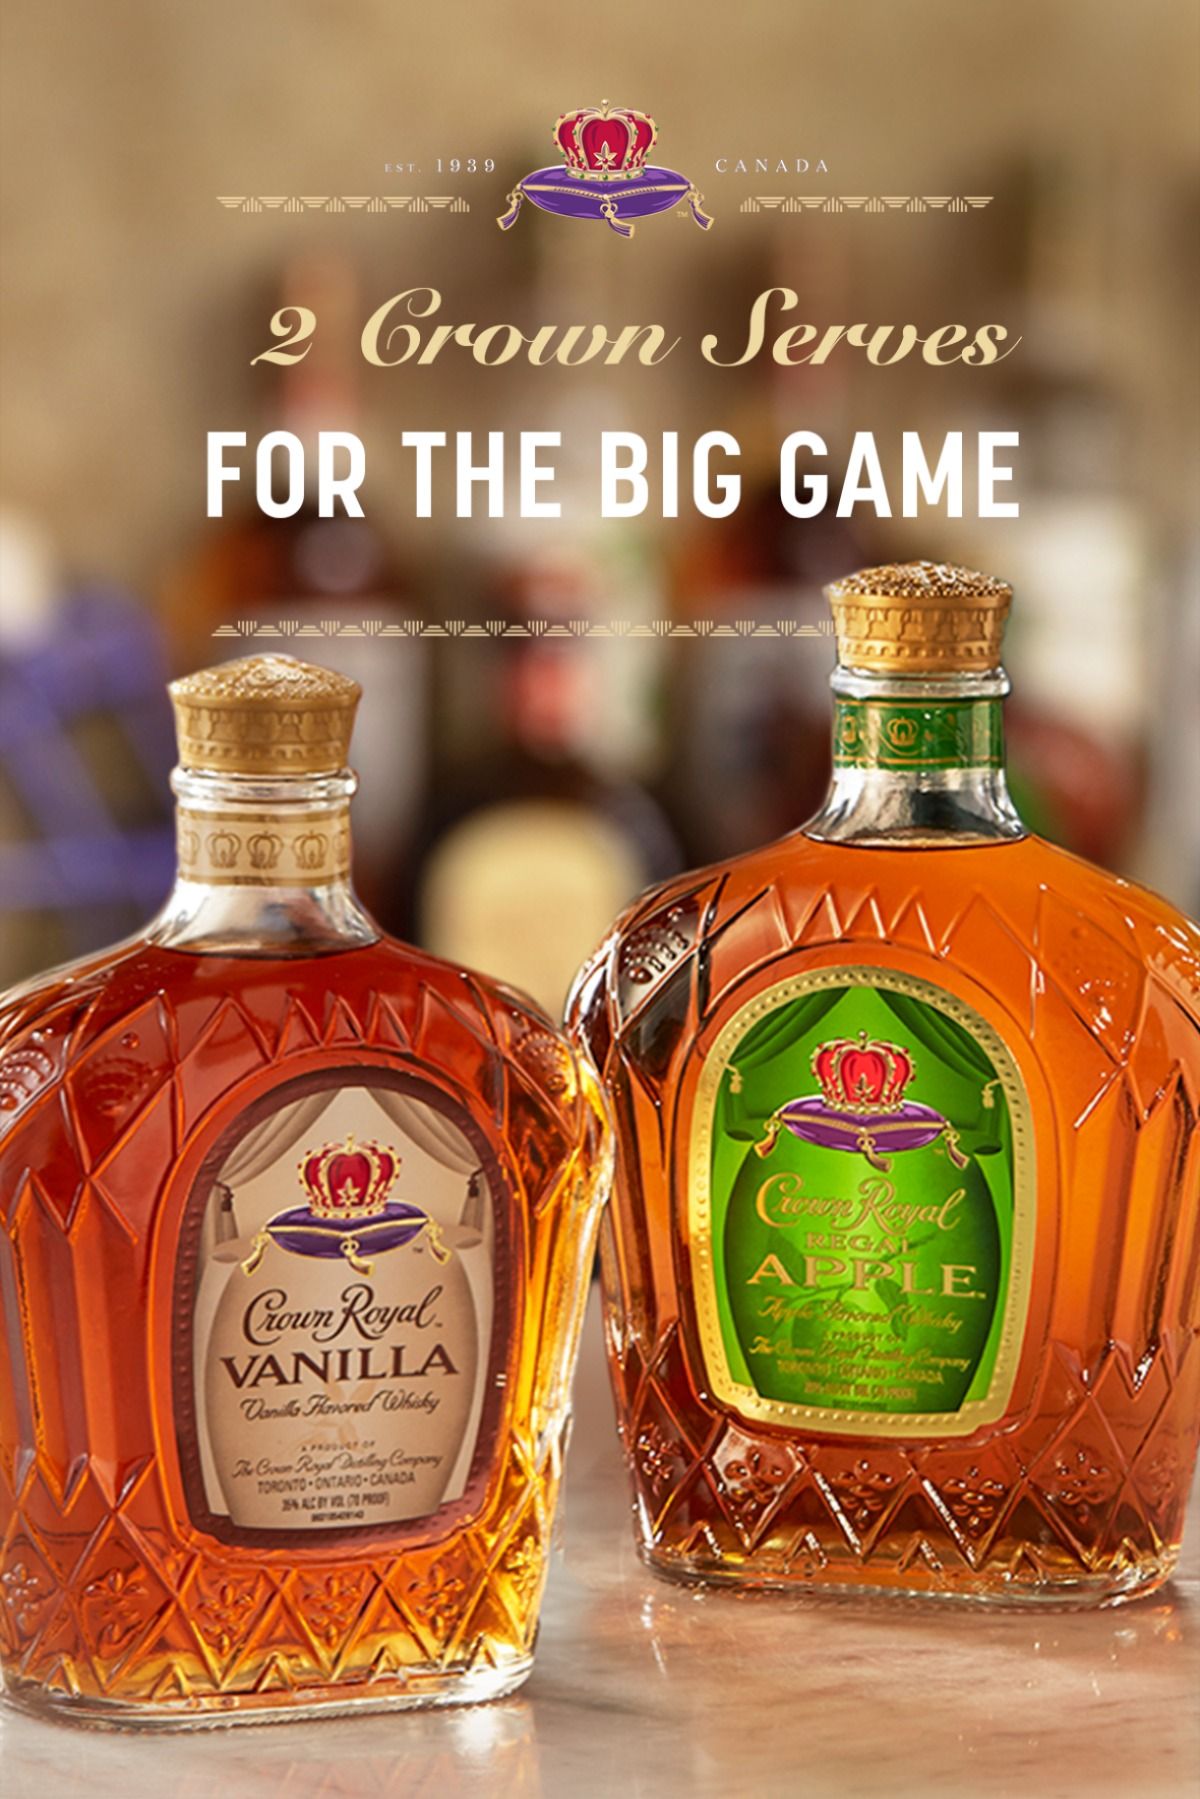 Where To Buy Crown Royal Canadian Whisky in 2020